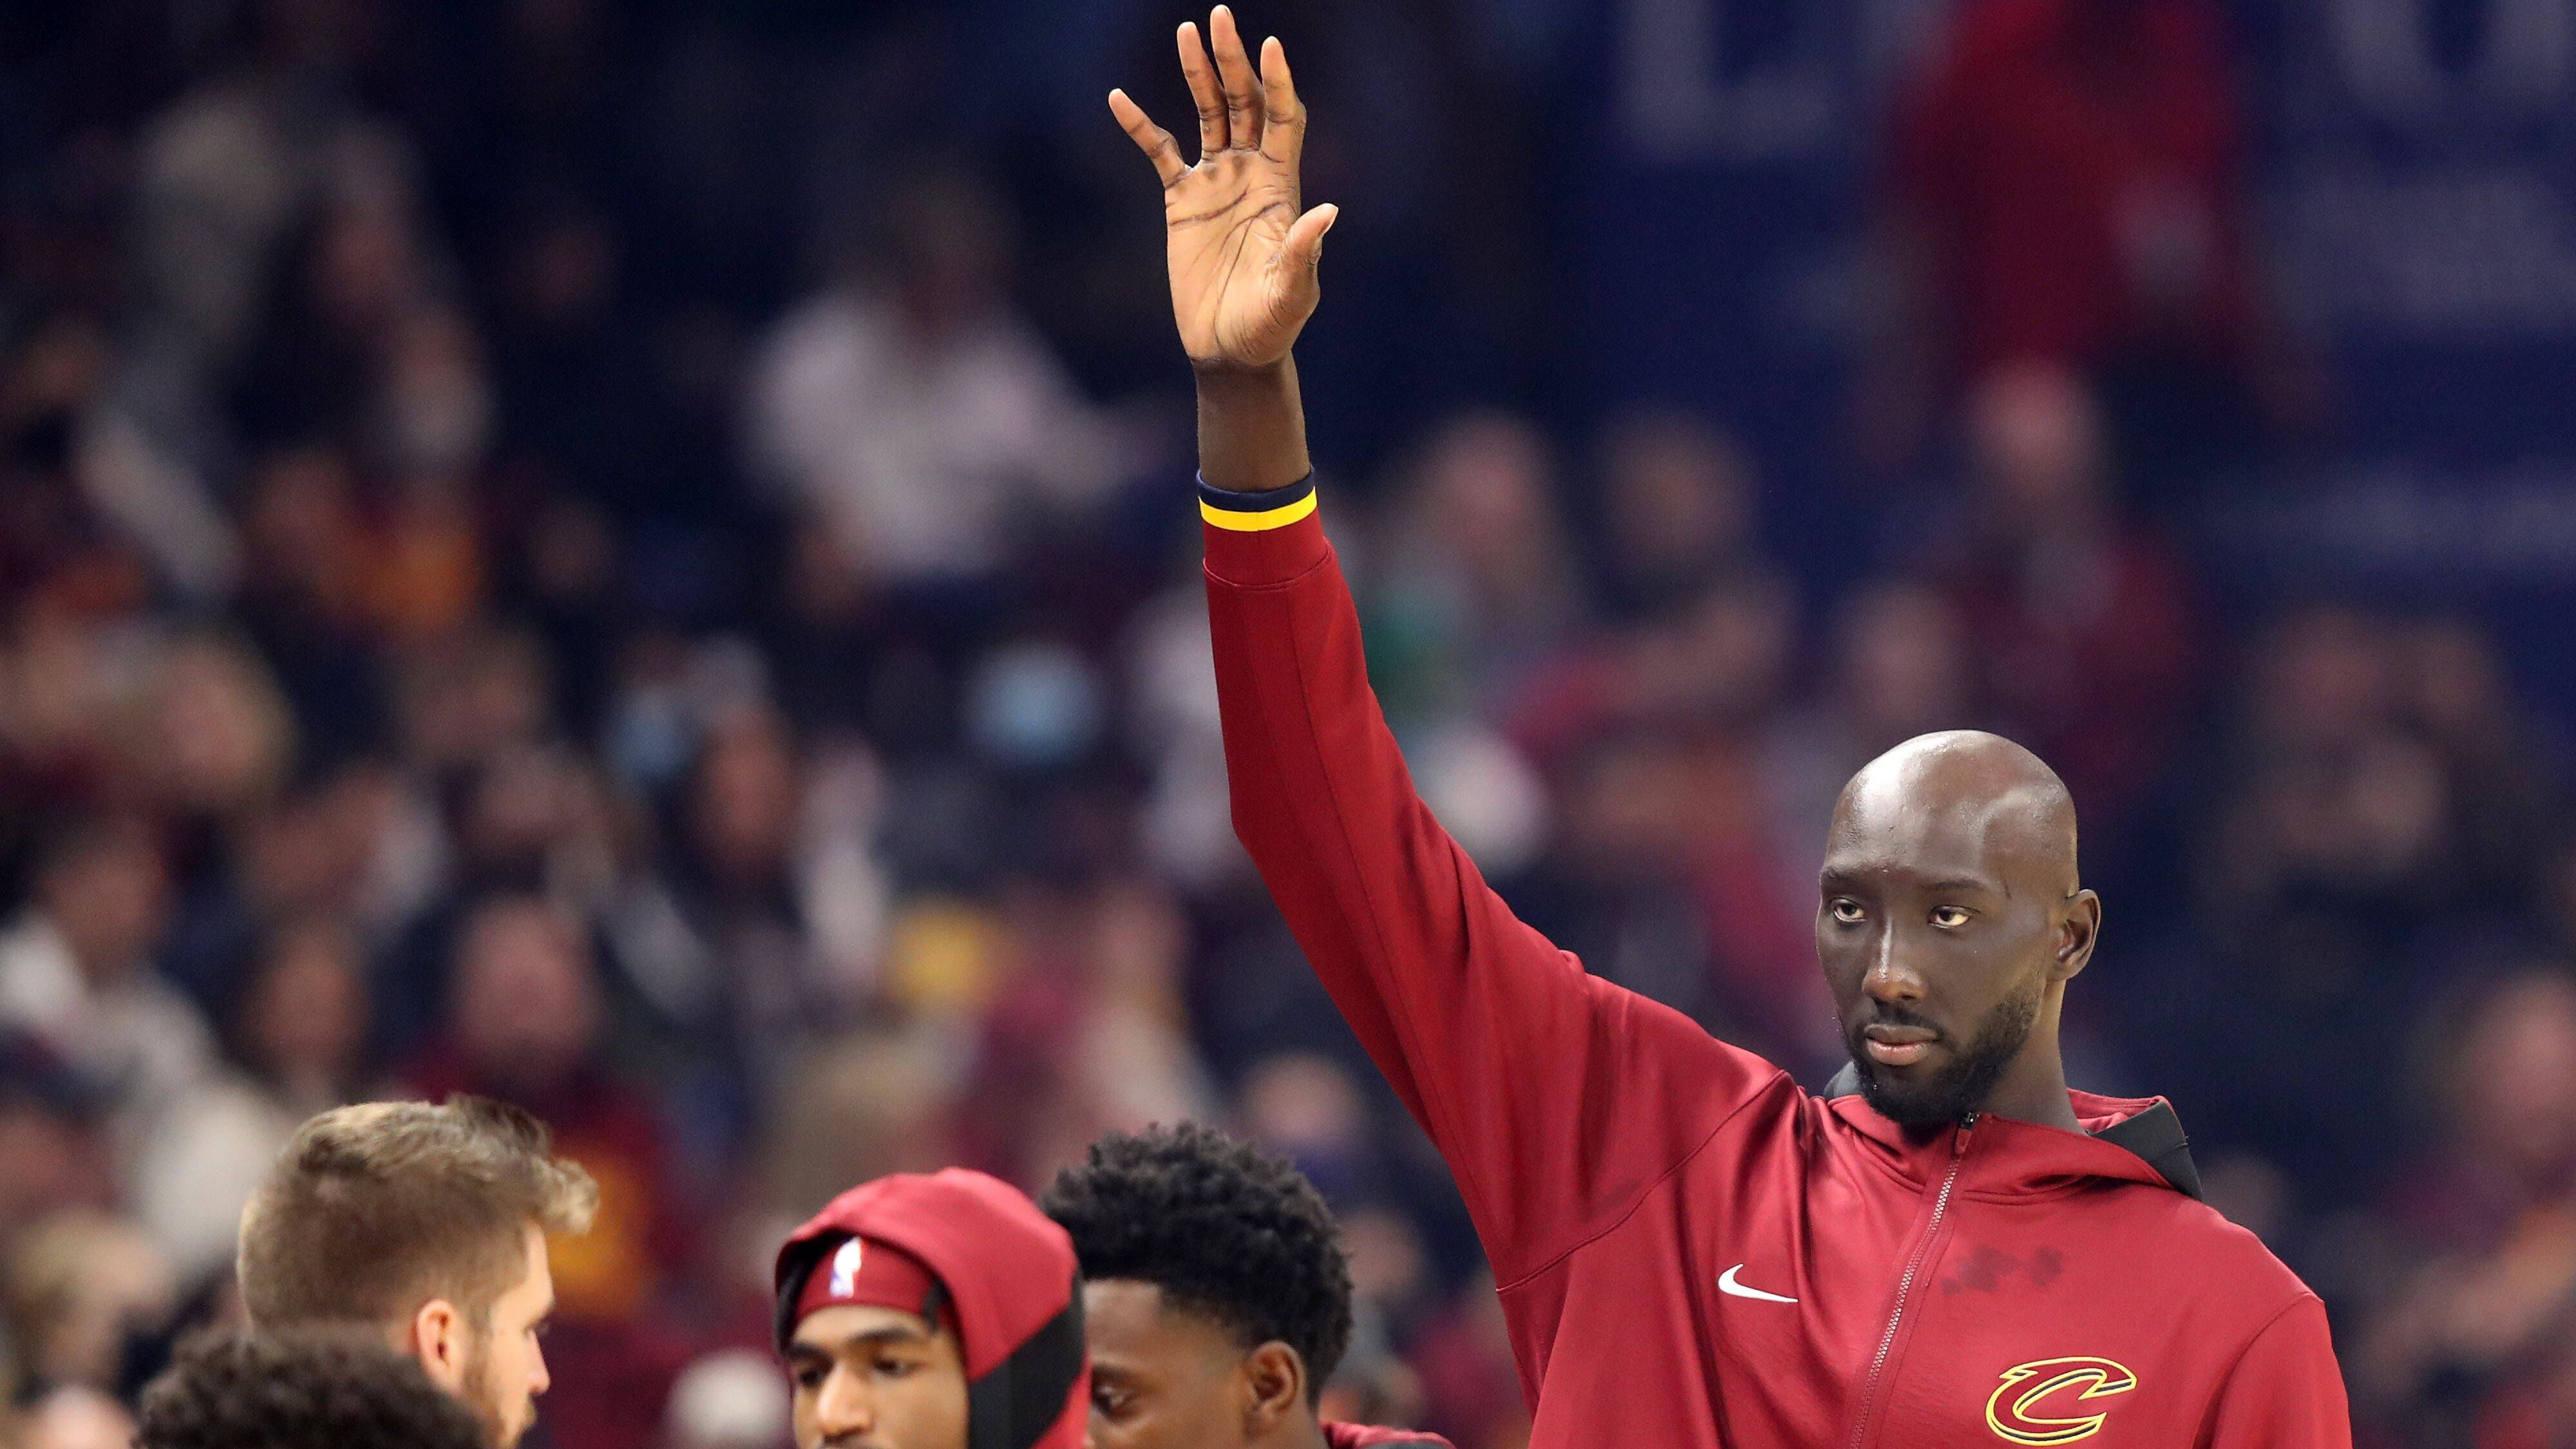 <strong>Tacko Fall - 2,29m</strong><br><strong>Teams:</strong> Boston Celtics, Cleveland Cavaliers<br><strong>Karriere-Stats:</strong> 2,2 Punkte, 2,4 Rebounds, 0,2 Assists<br><strong>Auszeichnungen:</strong> -